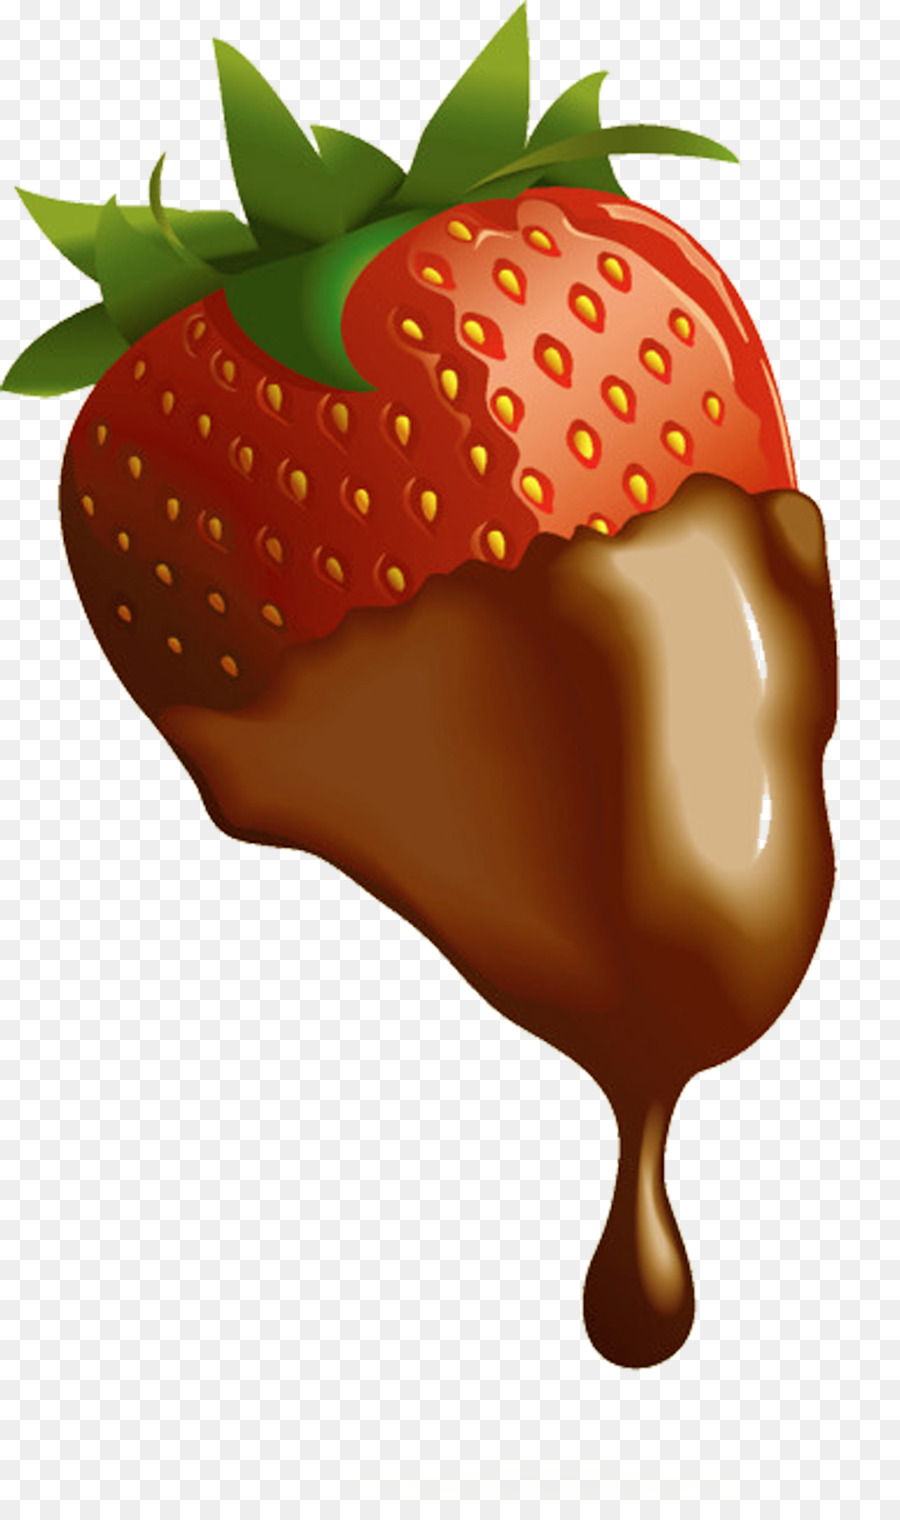 Chocolate covered strawberries clipart 6 » Clipart Station.